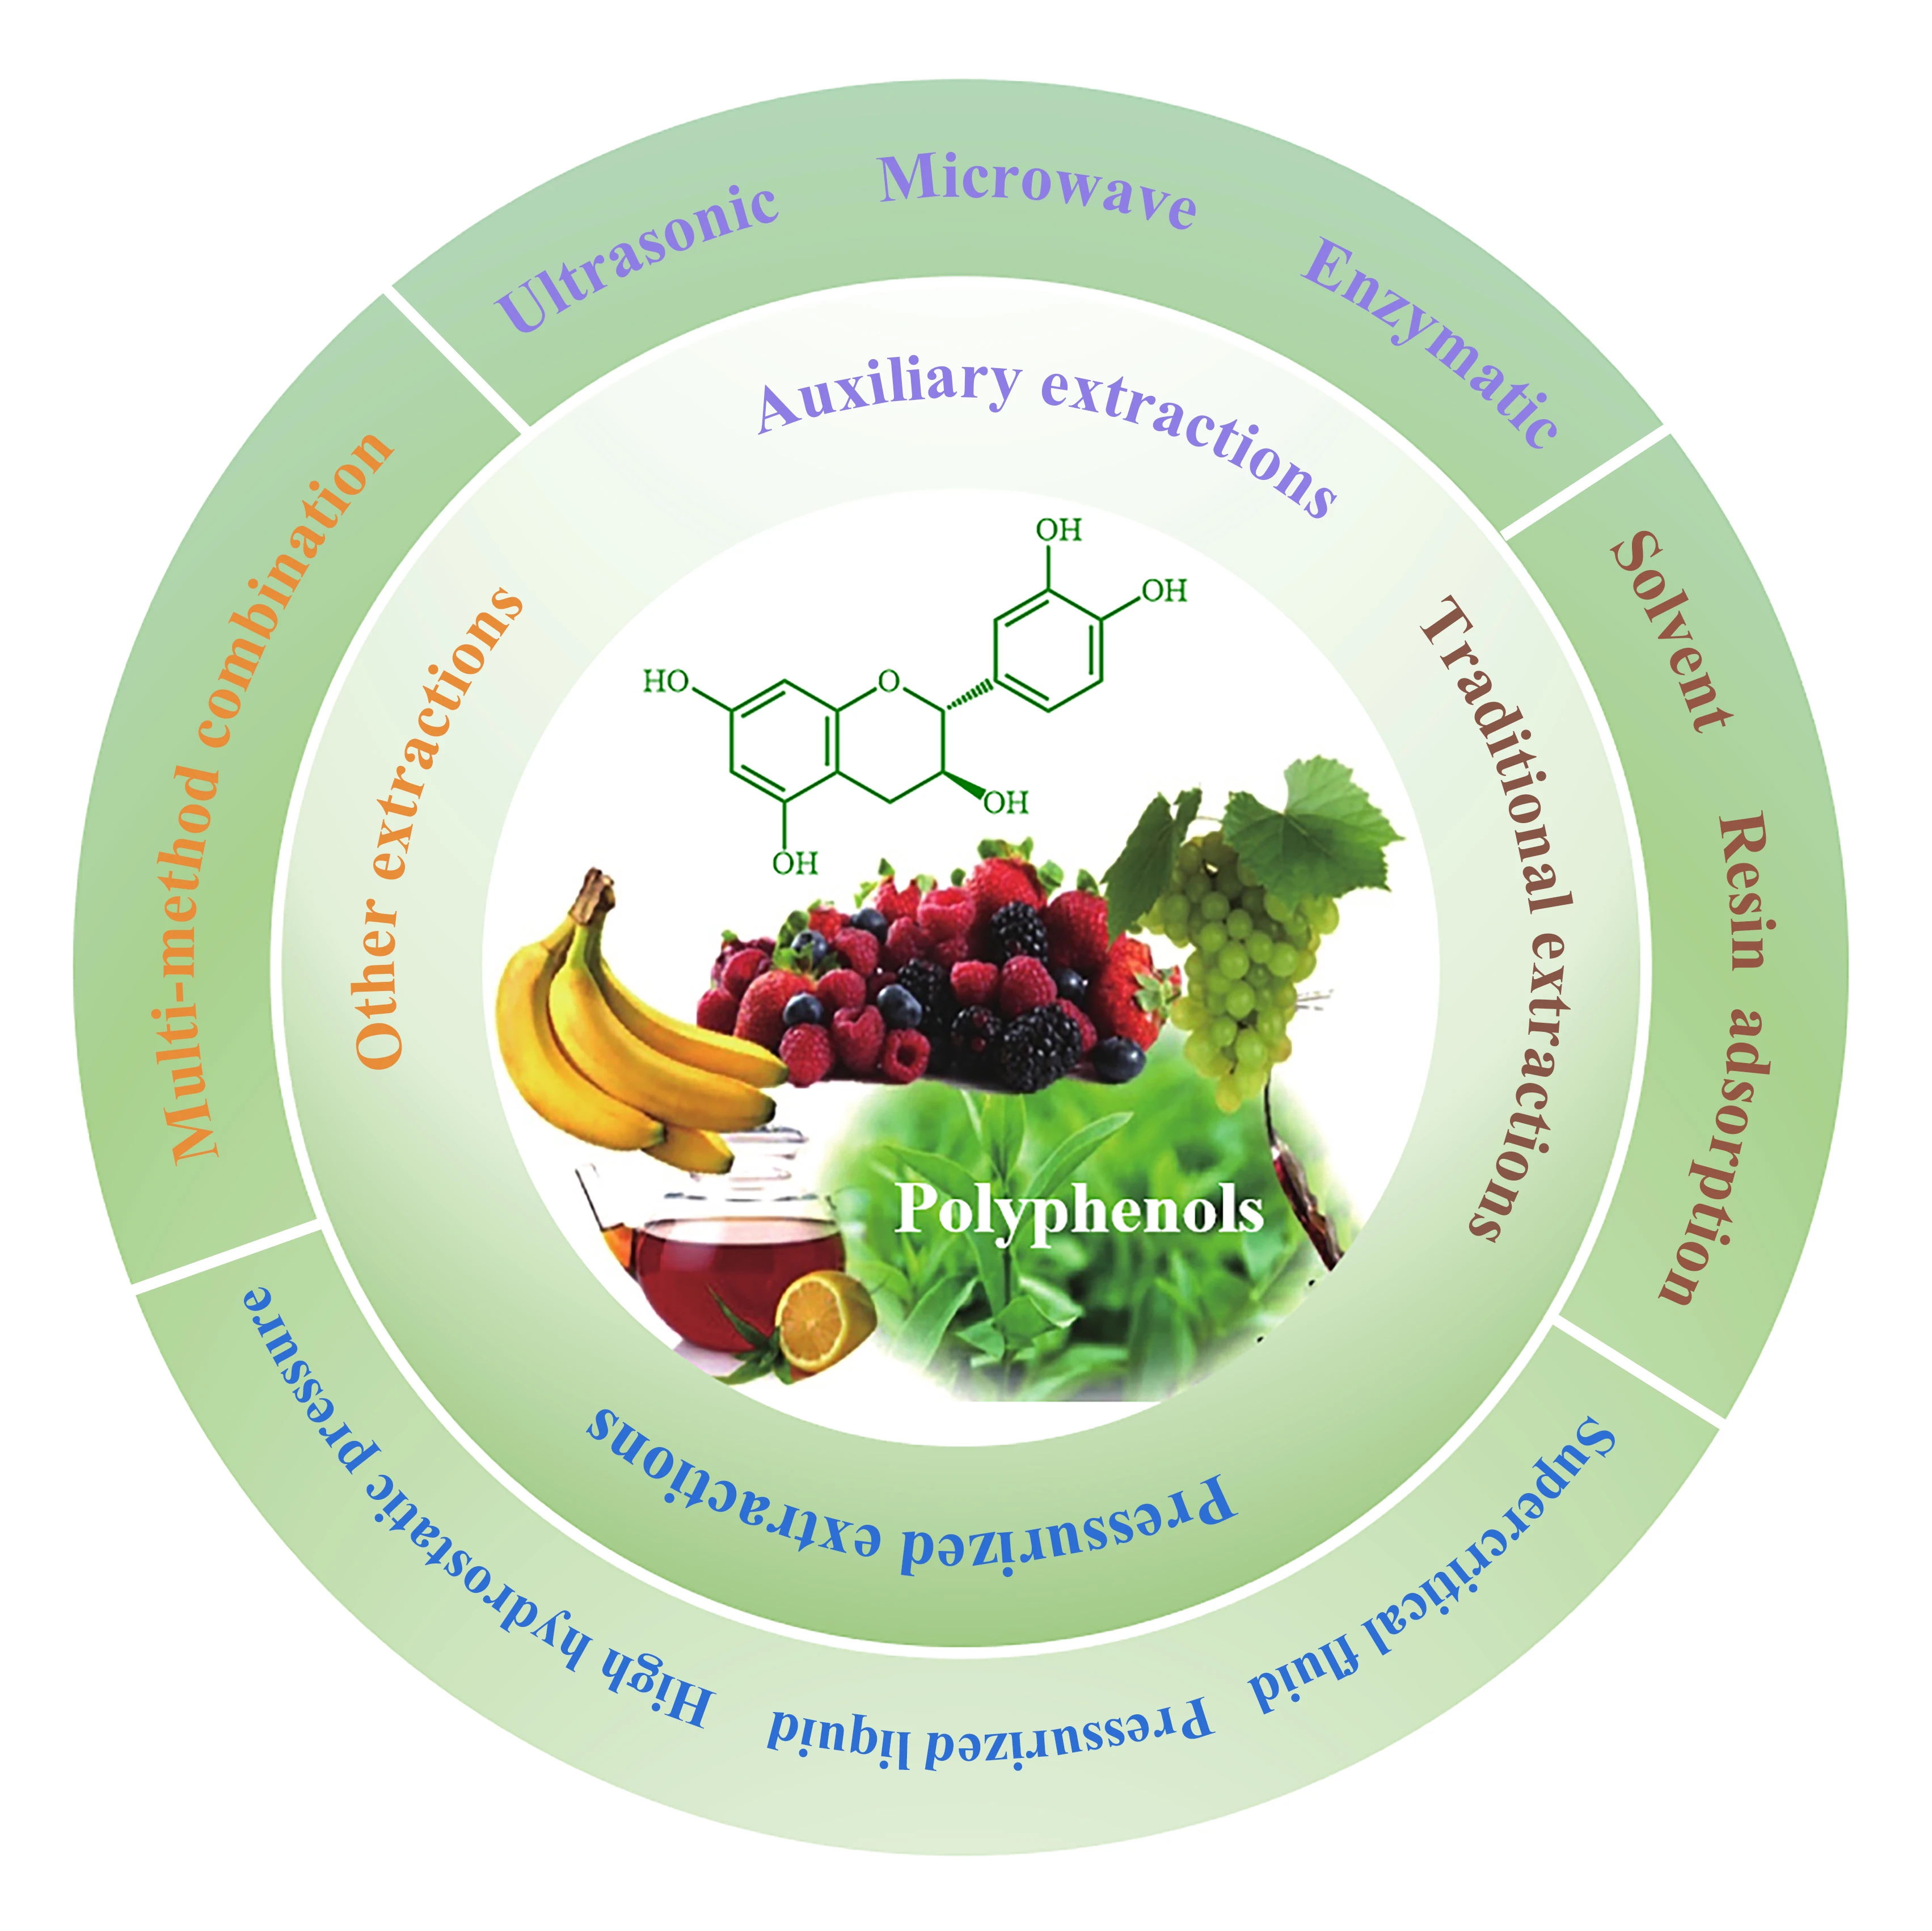 Recent Technologies for the Extraction and Separation of Polyphenols in Different Plants: A Review